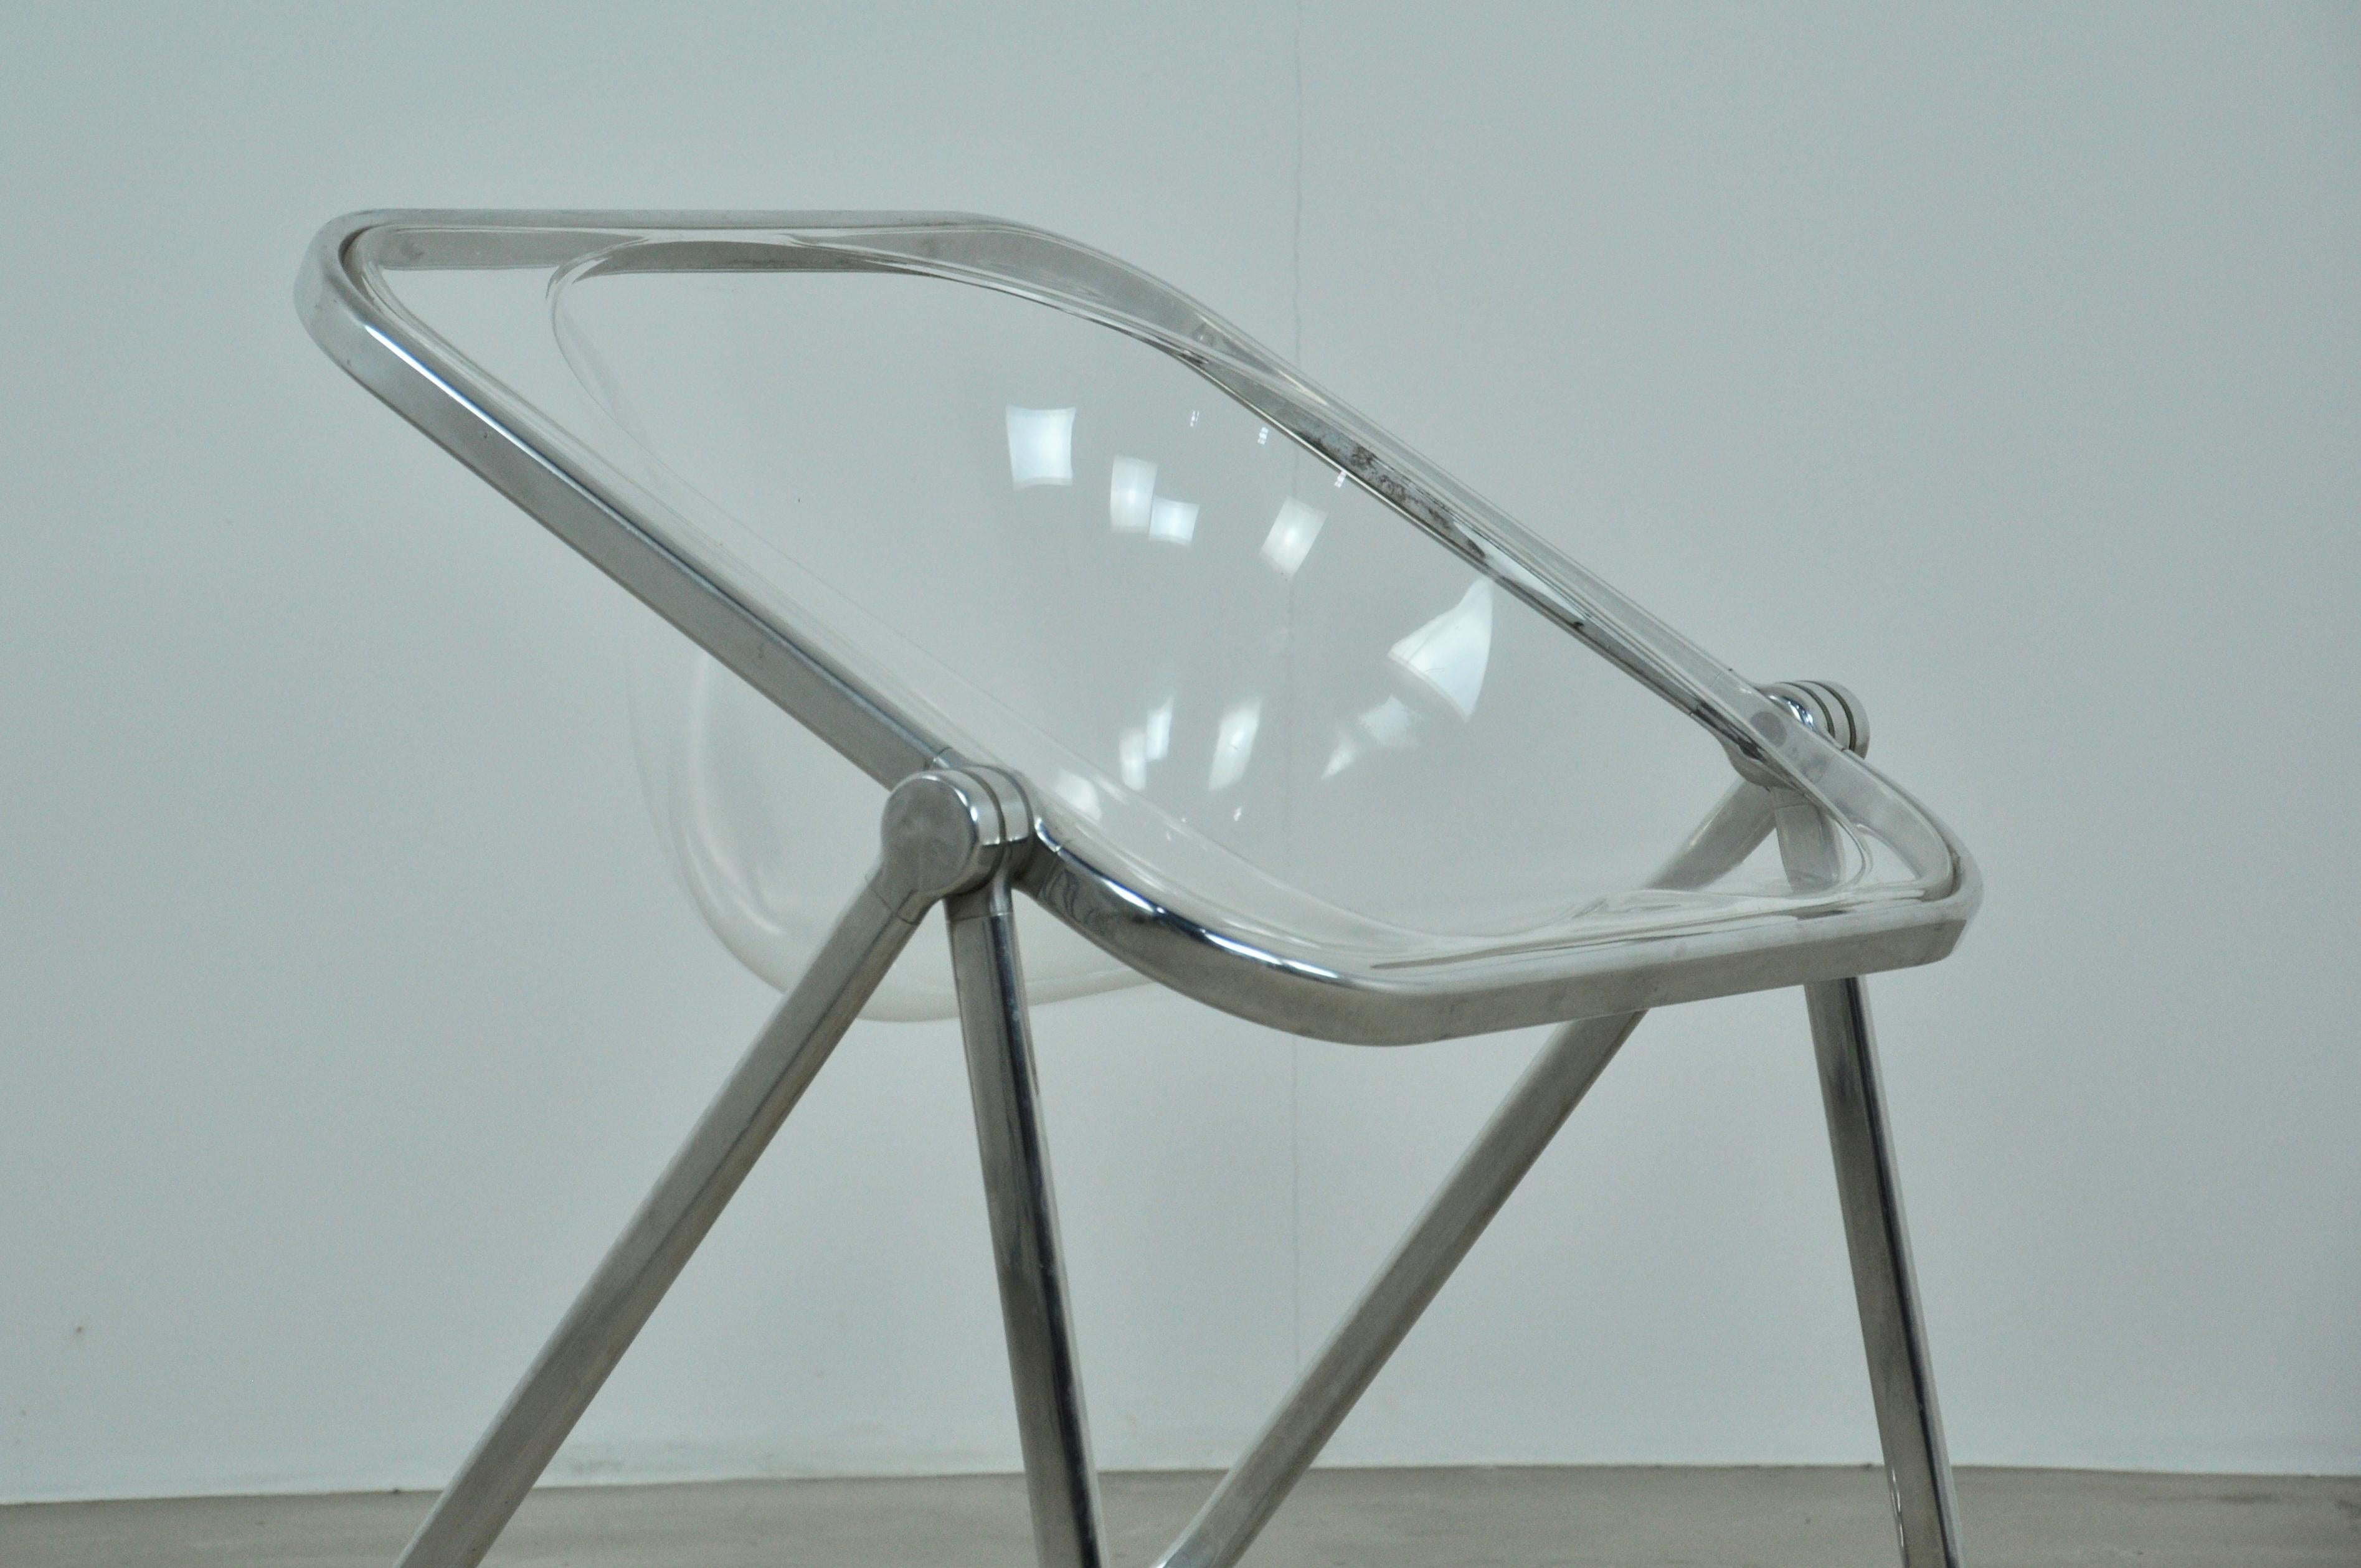 Transparent folding plastic armchair, metal structure. Wear due to time and the age of the object. Measures: Seat height 44cm.